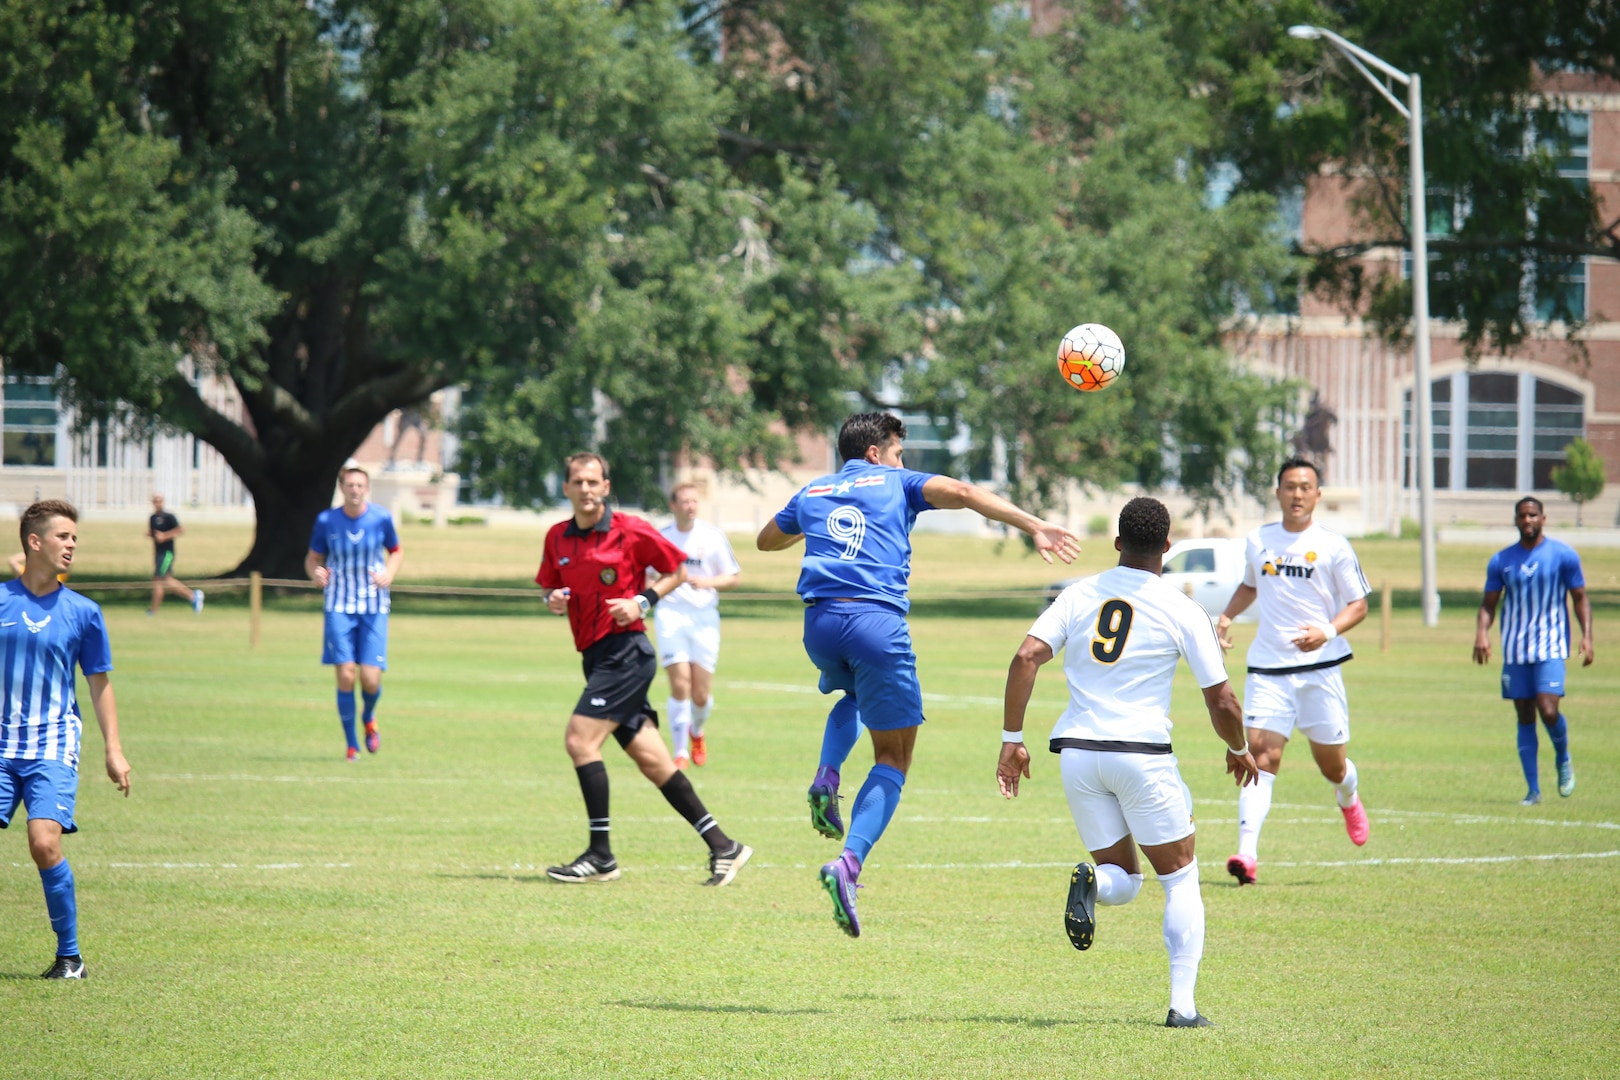 1st Lt. Aaron Zendejas (blue #9) seen here heading the ball, scored the second goal of the match to give Air Force a 2-0 lead at halftime.  Air Force defeated Army 3-0 to win match six of the 2016 Armed Forces Men's Soccer Championship hosted at Fort Benning, Ga from 6-14 May 2016.  Navy advances to the Championship Match versus Air Force.